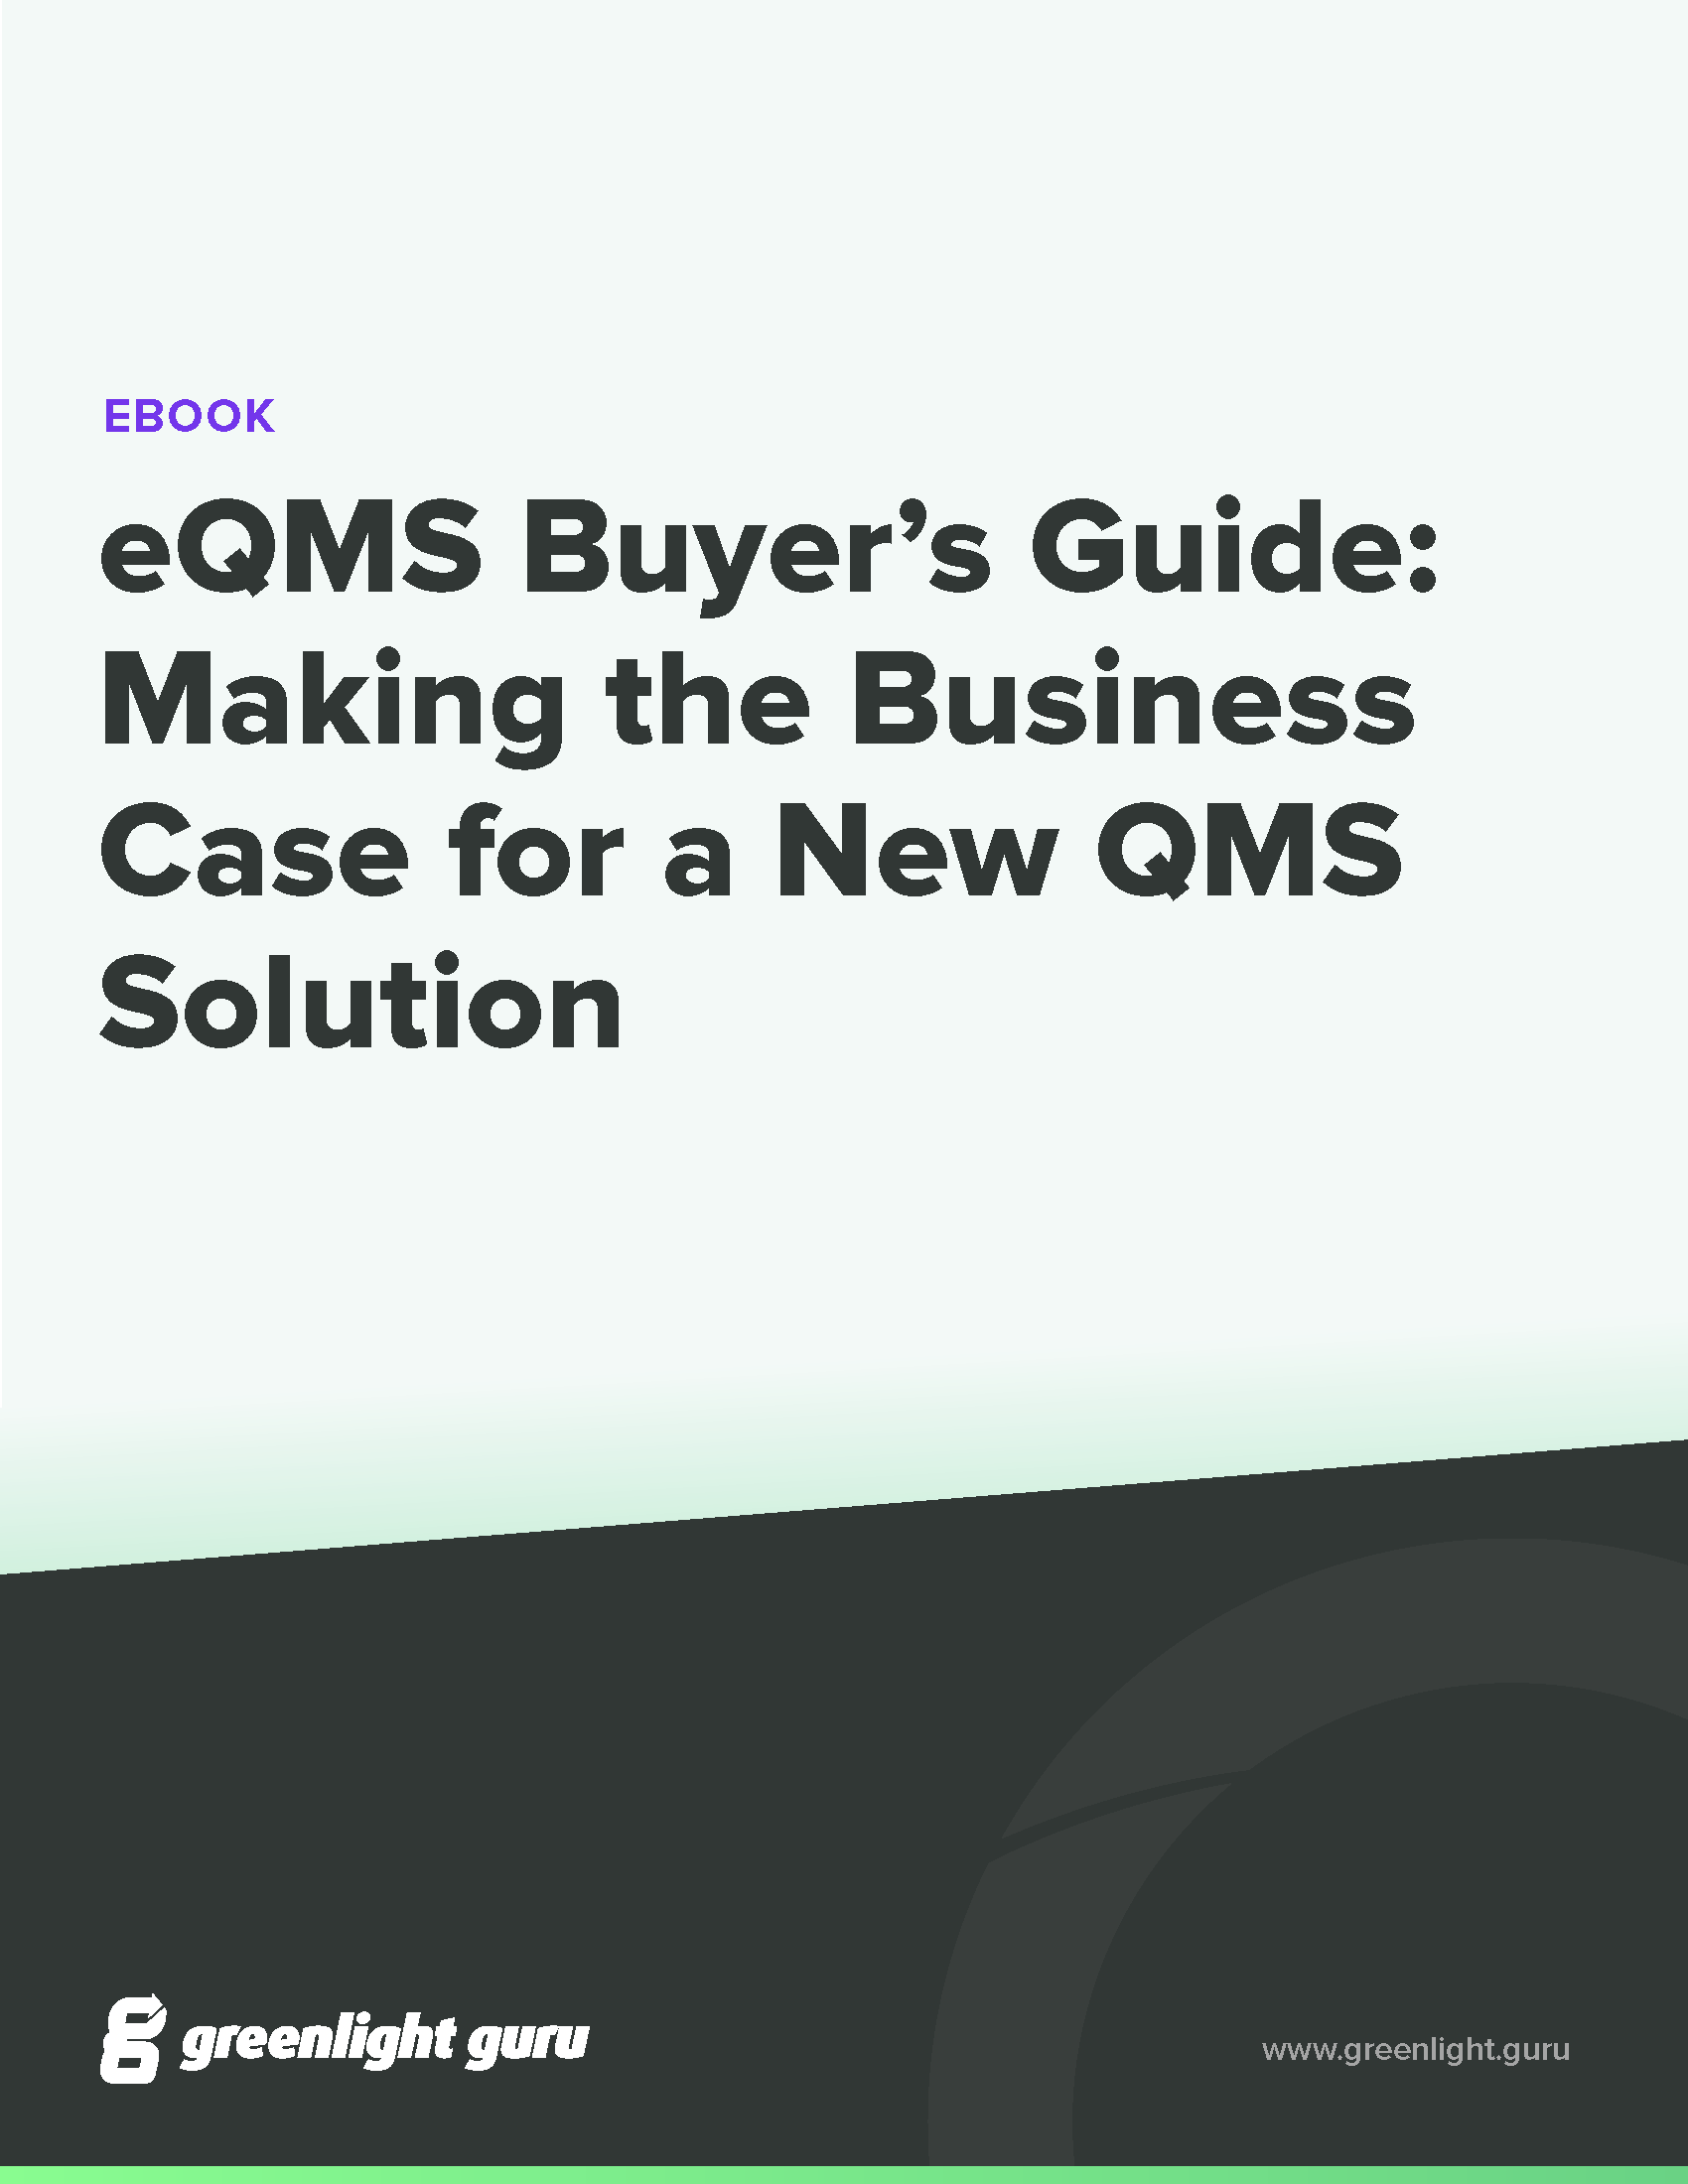 (cover) eQMS Buyer’s Guide- Making the Business Case for a New QMS Solution